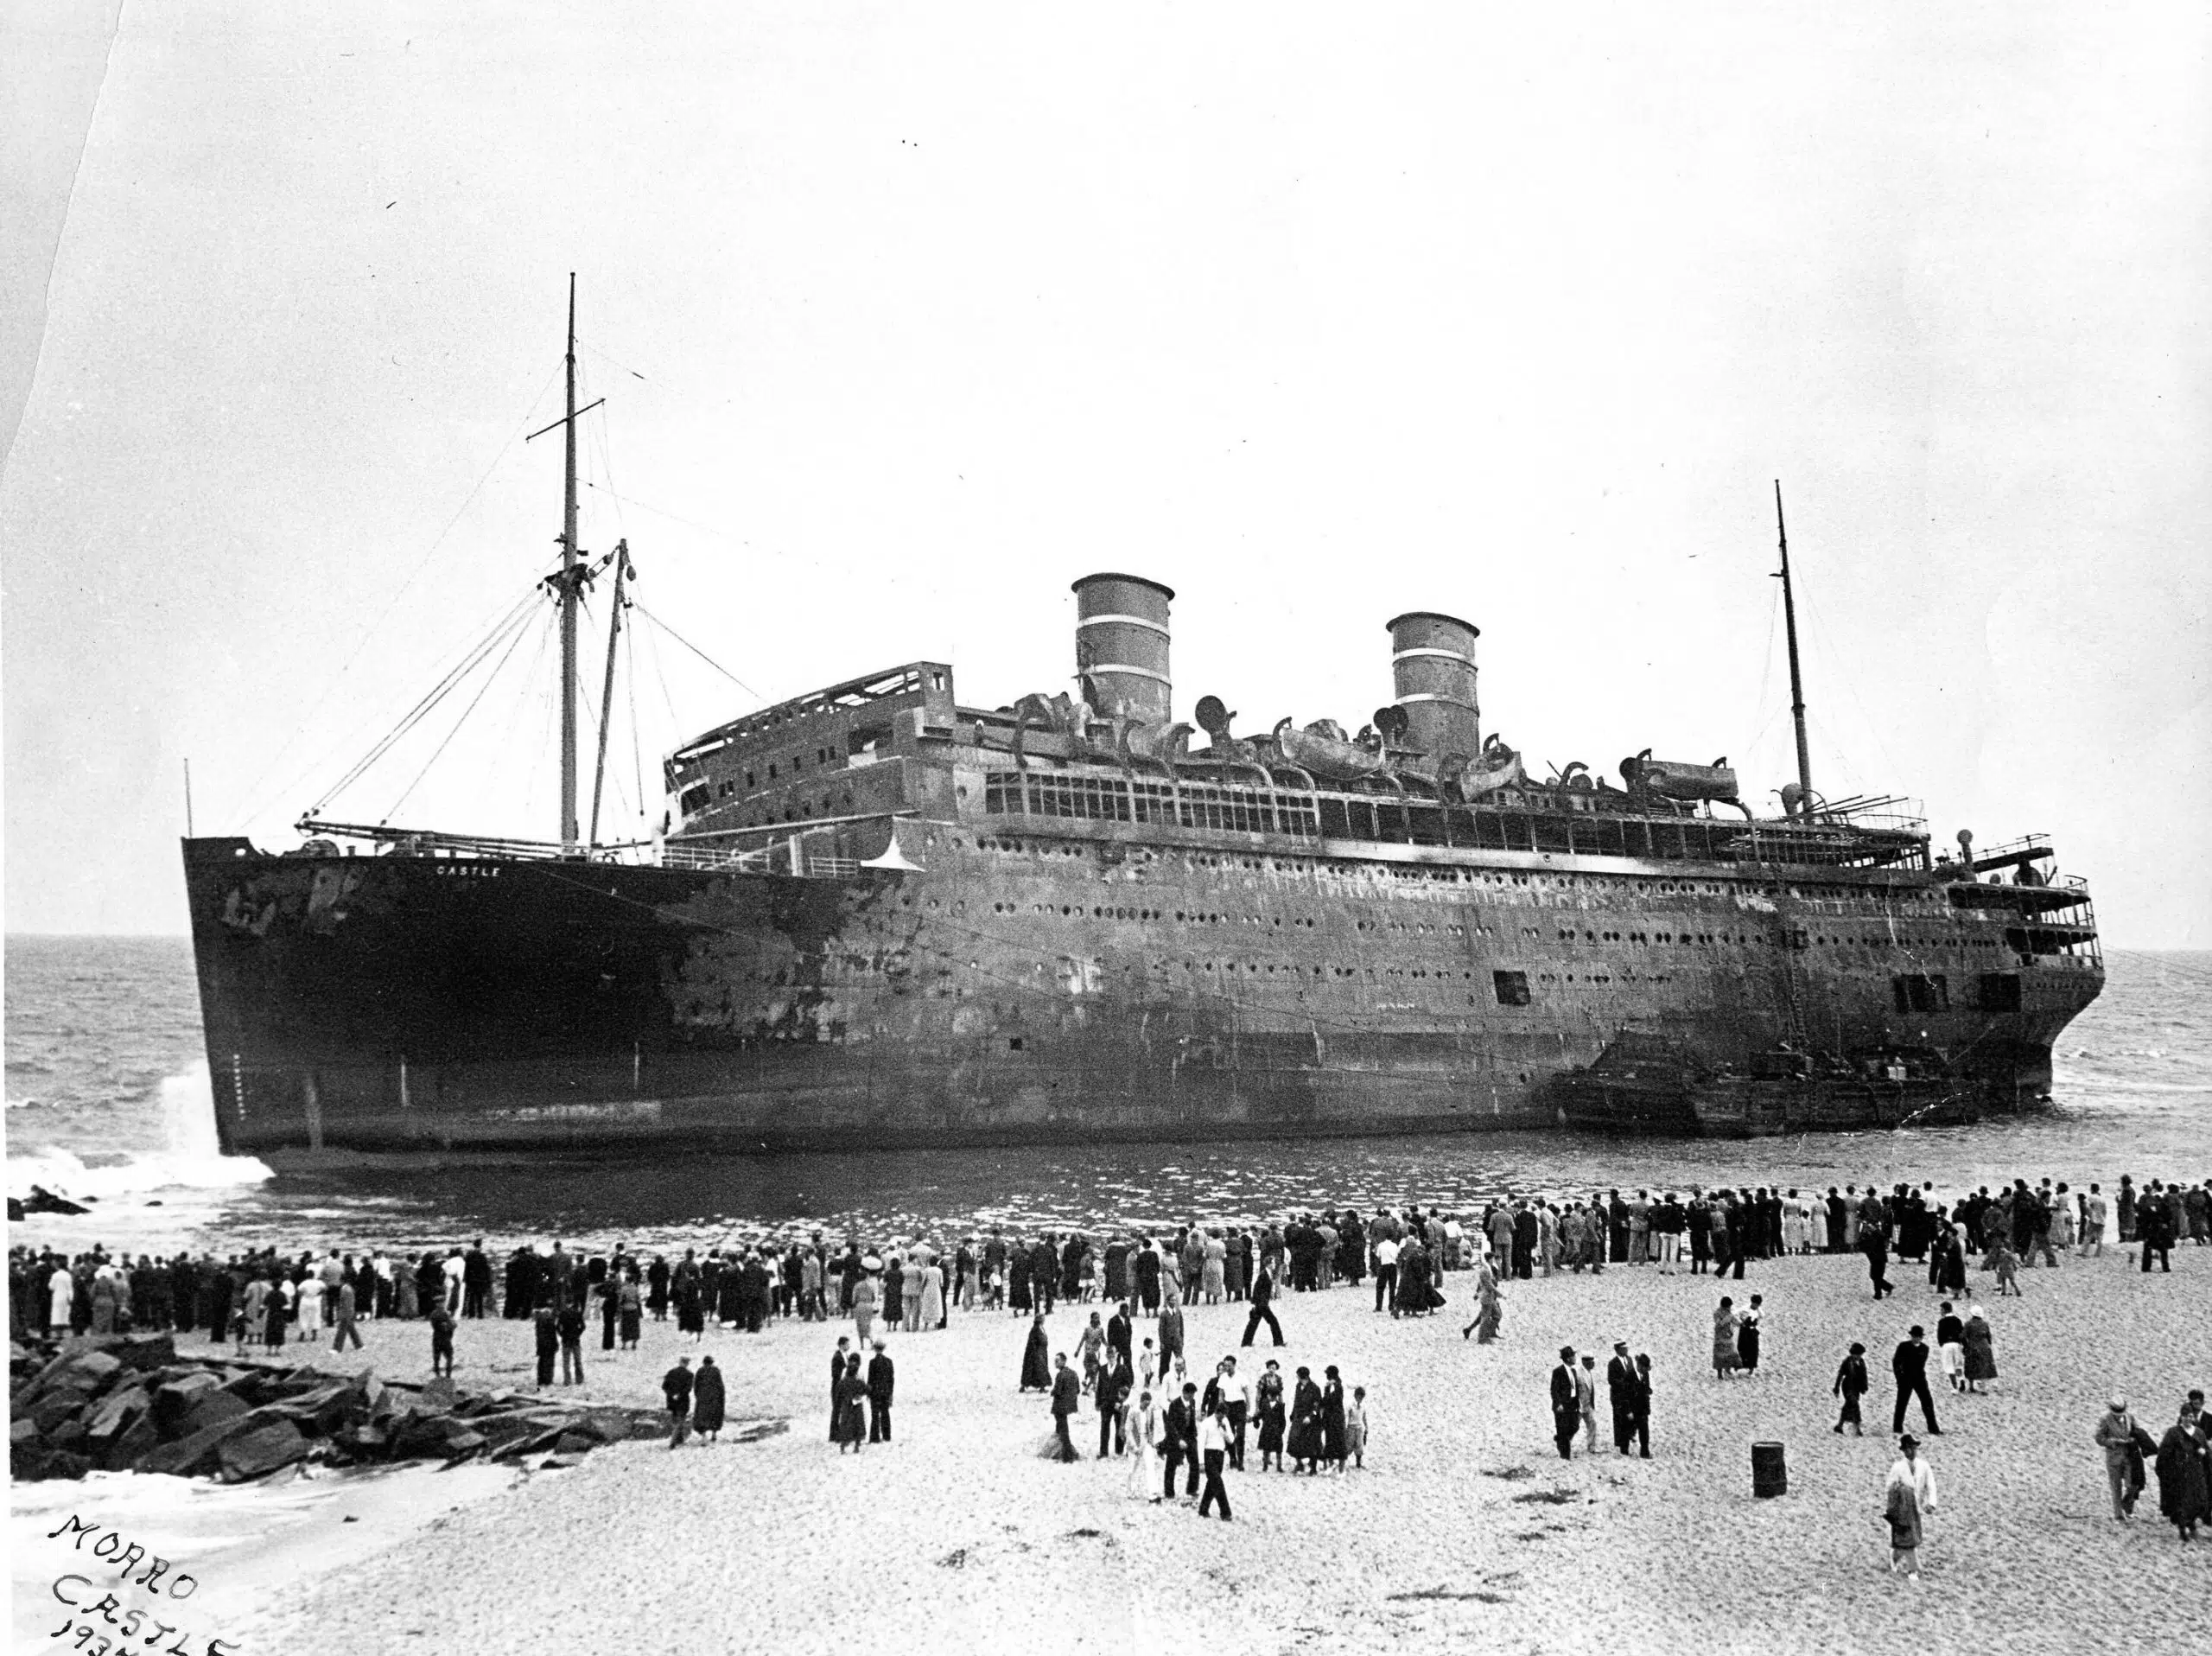 morro castle with lifeboats